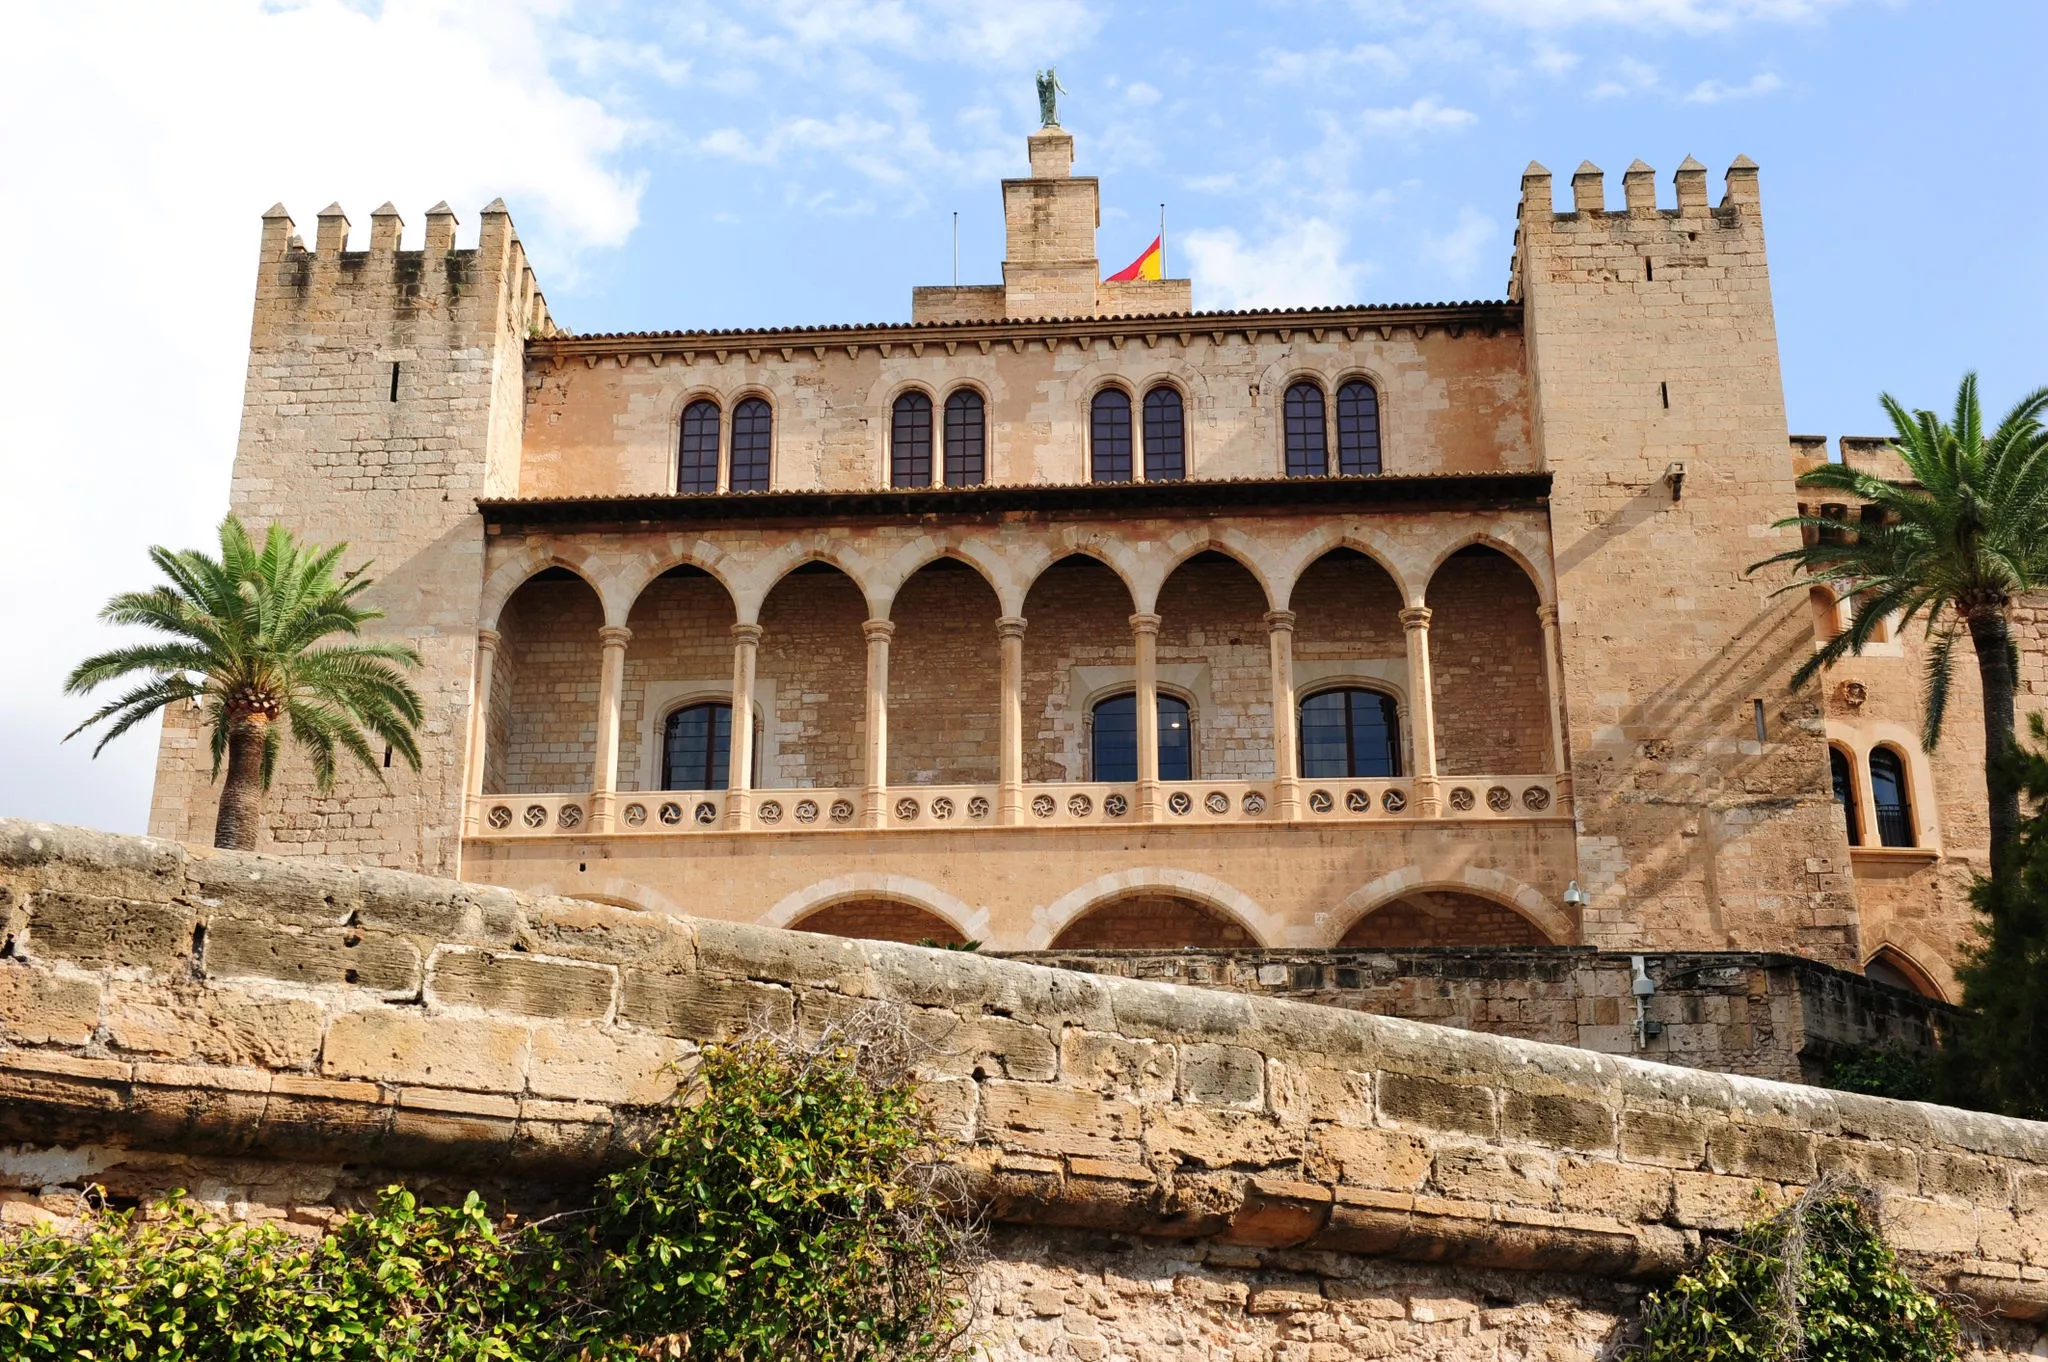 Almudaina Palace in Spain, Europe | Architecture - Rated 3.6